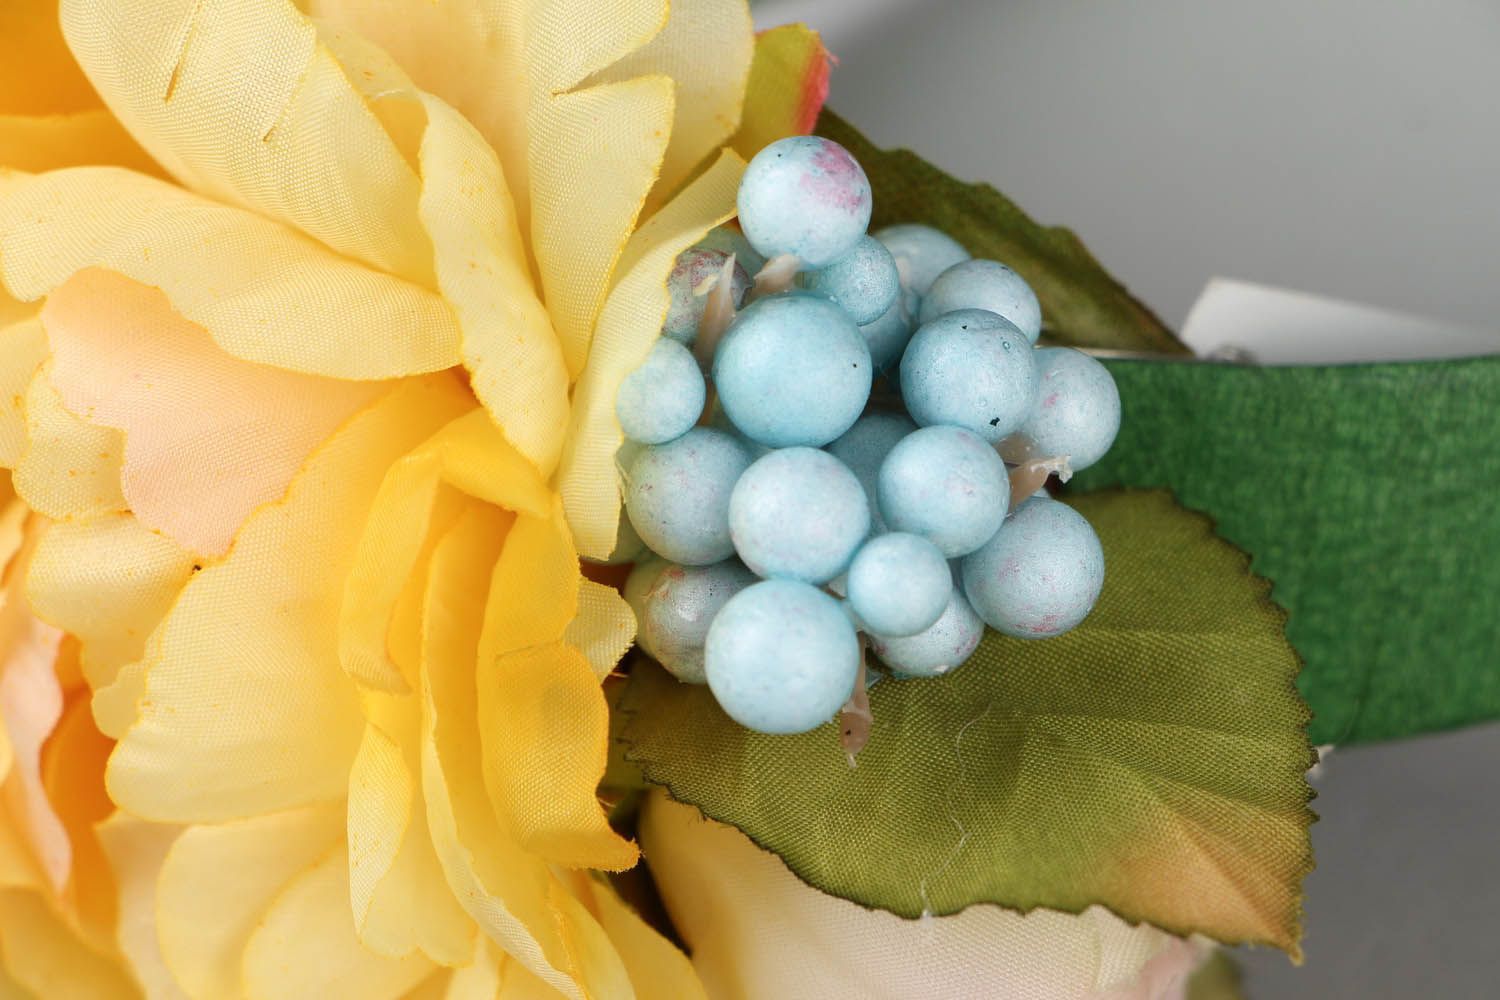 Headband with flowers and berries photo 4